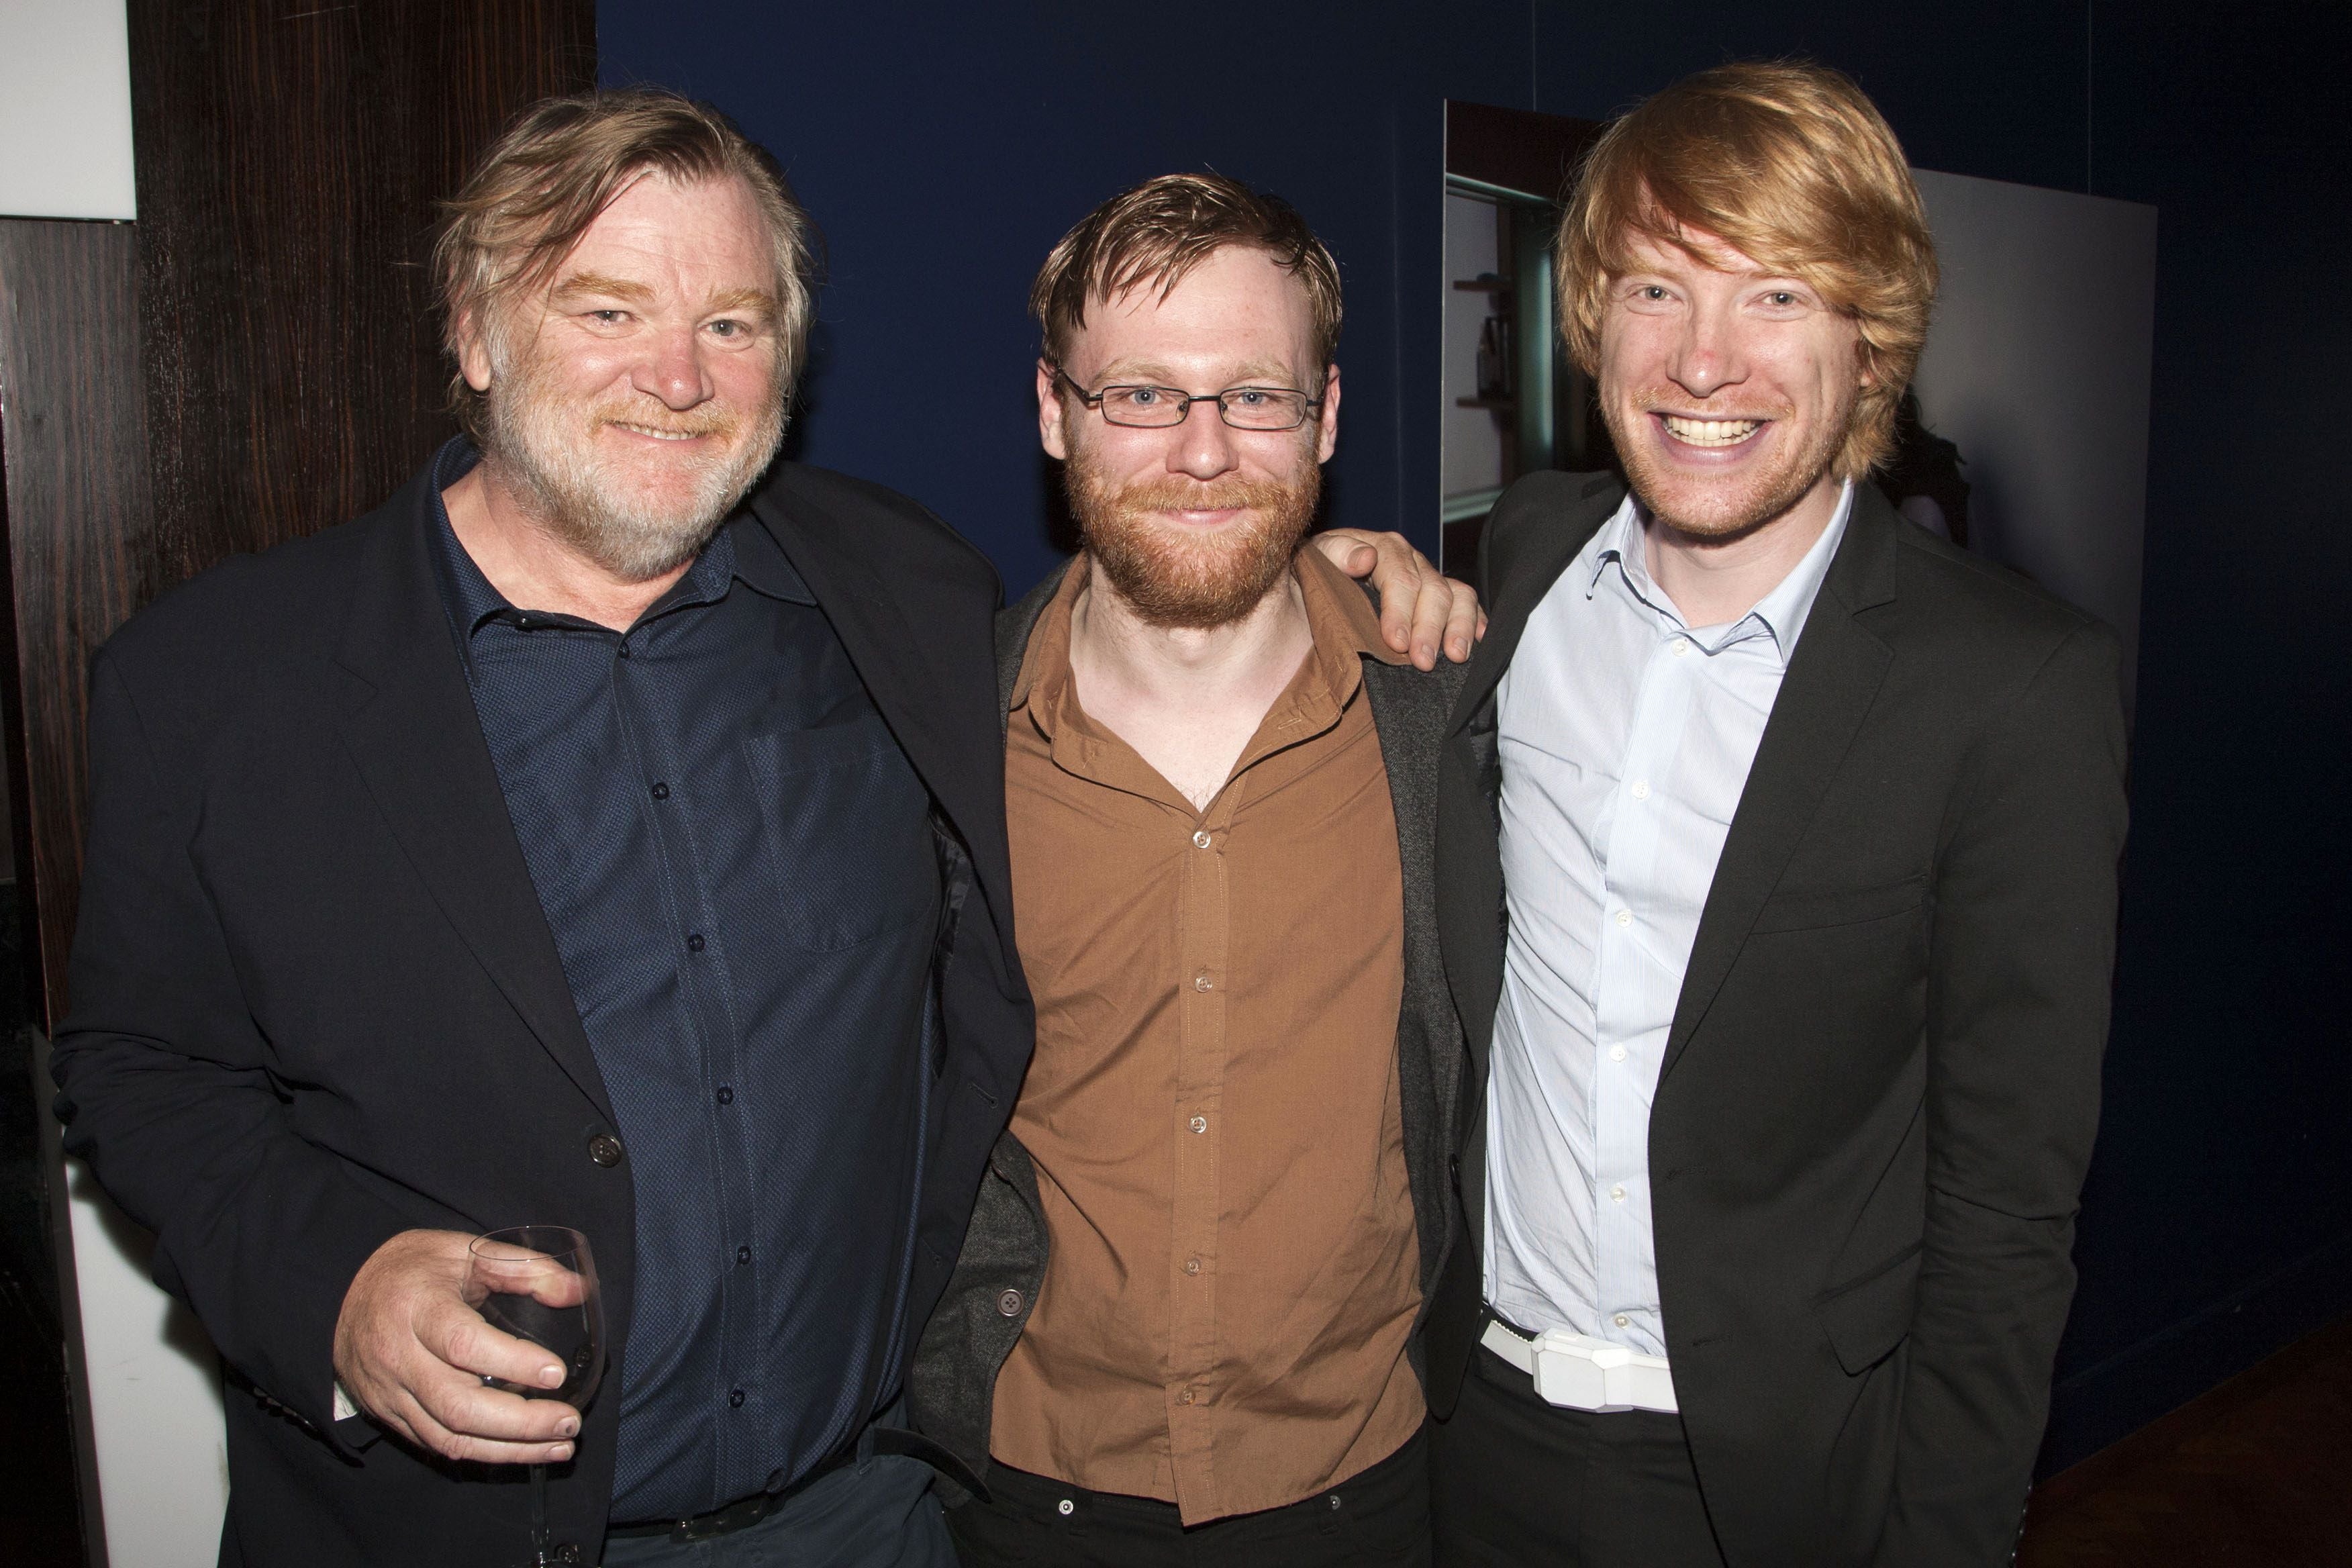 The Gleeson dynasty: Brendan, Brian and Domhnall in 2013